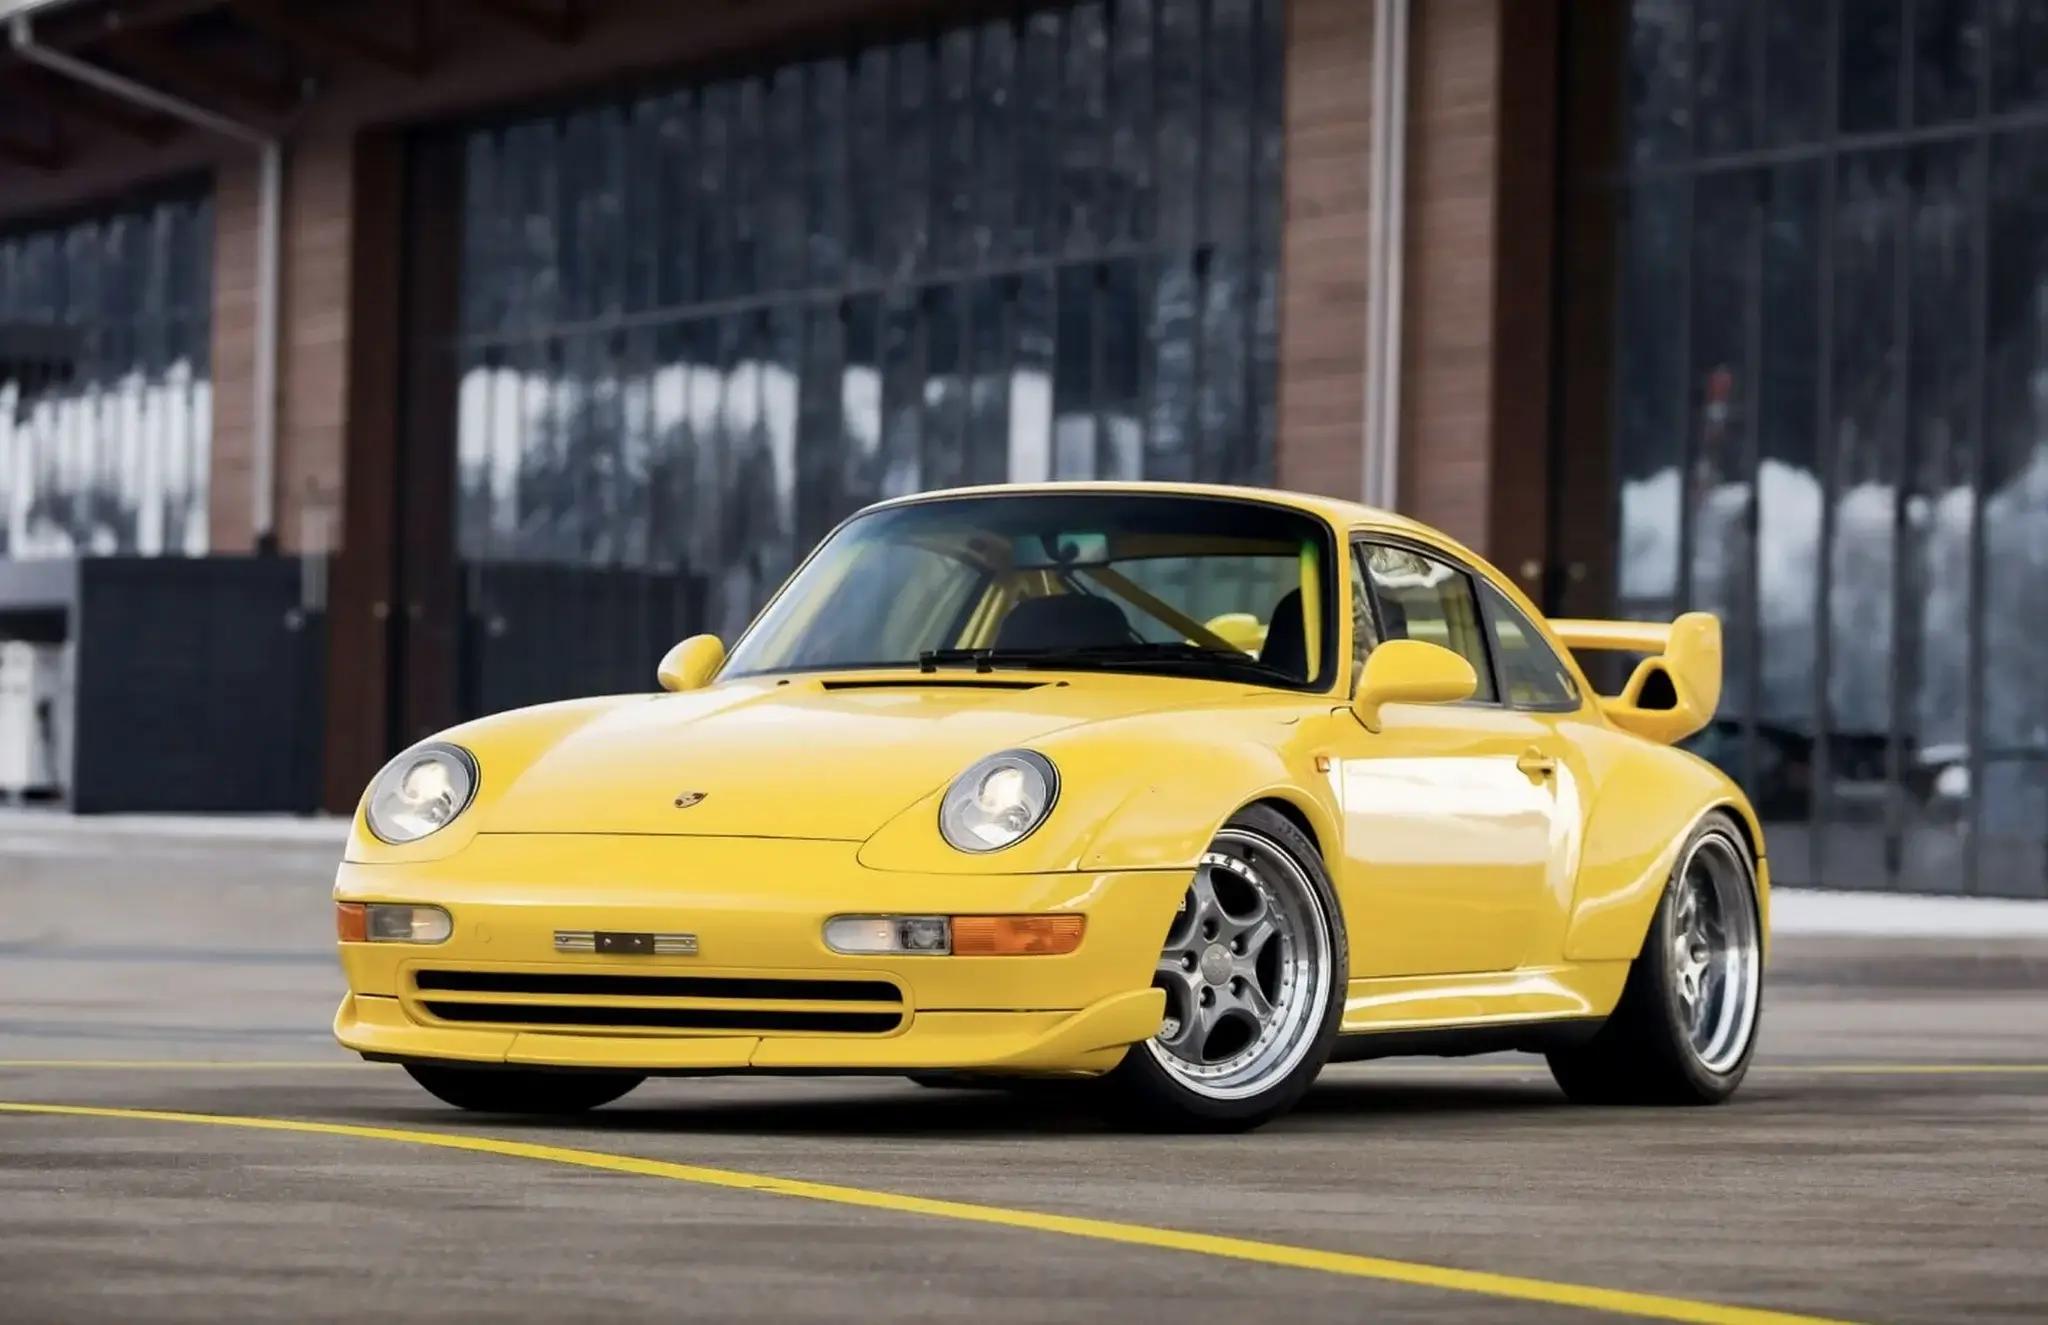 The Ultimate 911: the GT2